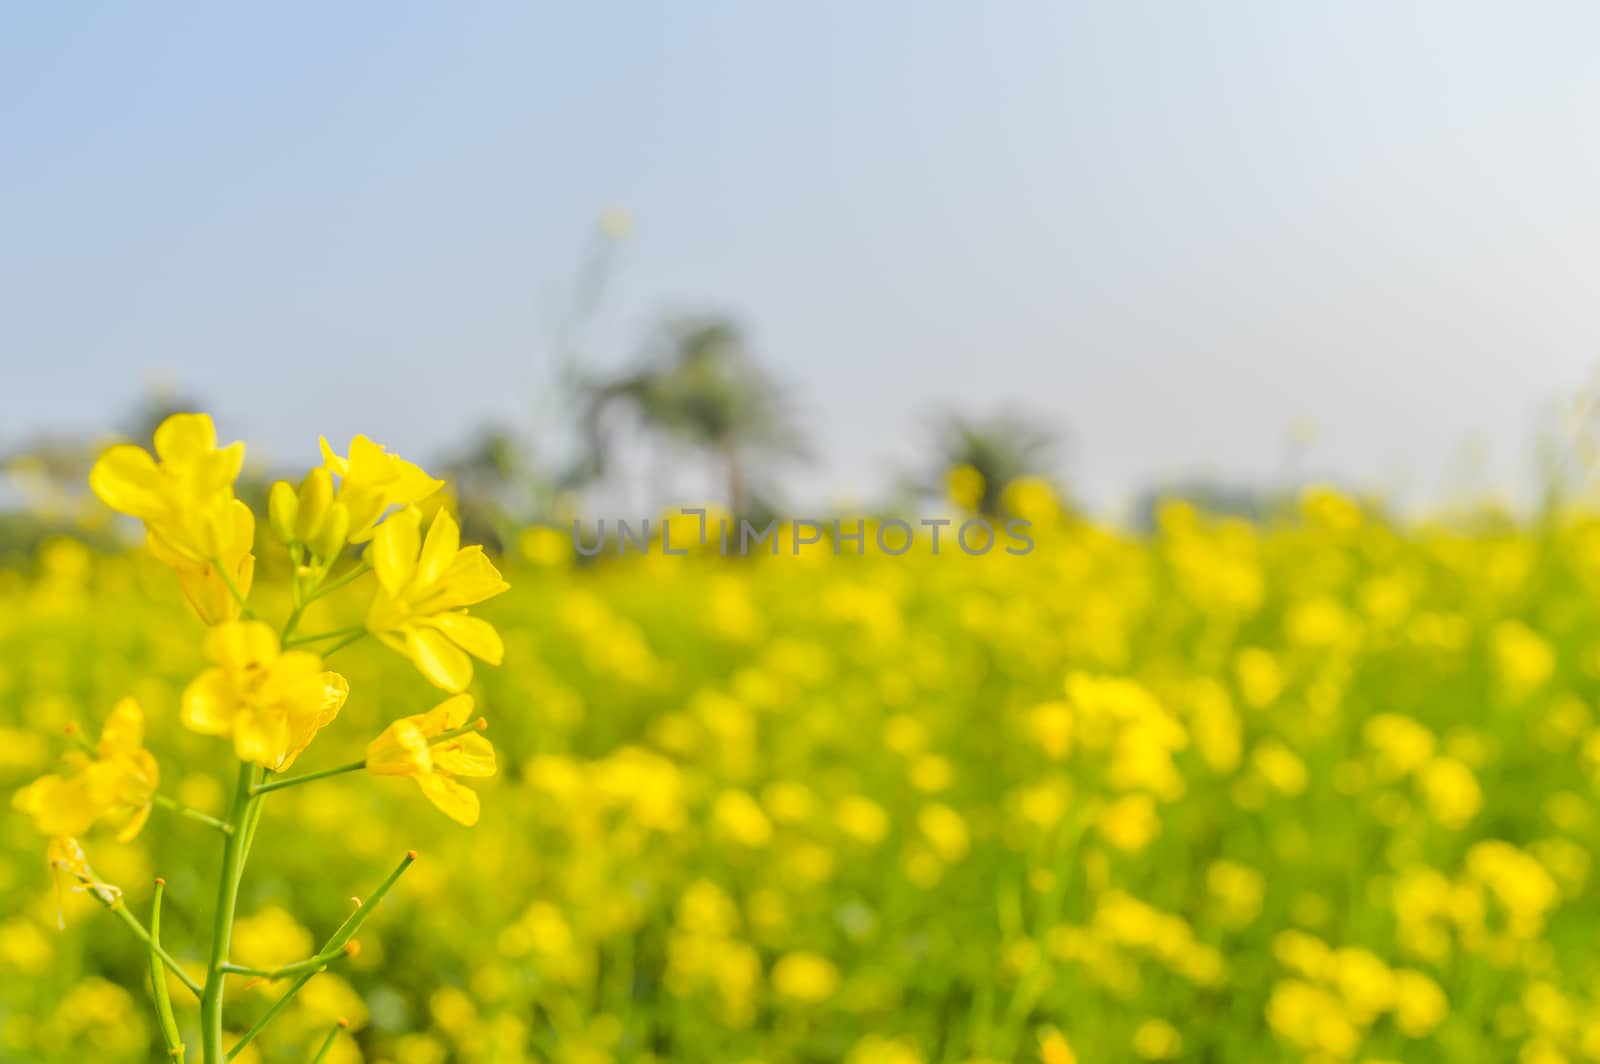 This is a photograph rapeseed flowers close up isolated on blurred background and its gorgeous petals captured from a Sunny field of rape flower garden. The image taken at dusk, at dawn, at daytime on a cloudy day. The Subject of the image is inspiration, exciting, hopeful, bright, sensational, tranquil, calm, and stunning. This photography is taken in as landscape style. This photograph may be used as a background, wallpaper, screen saver.